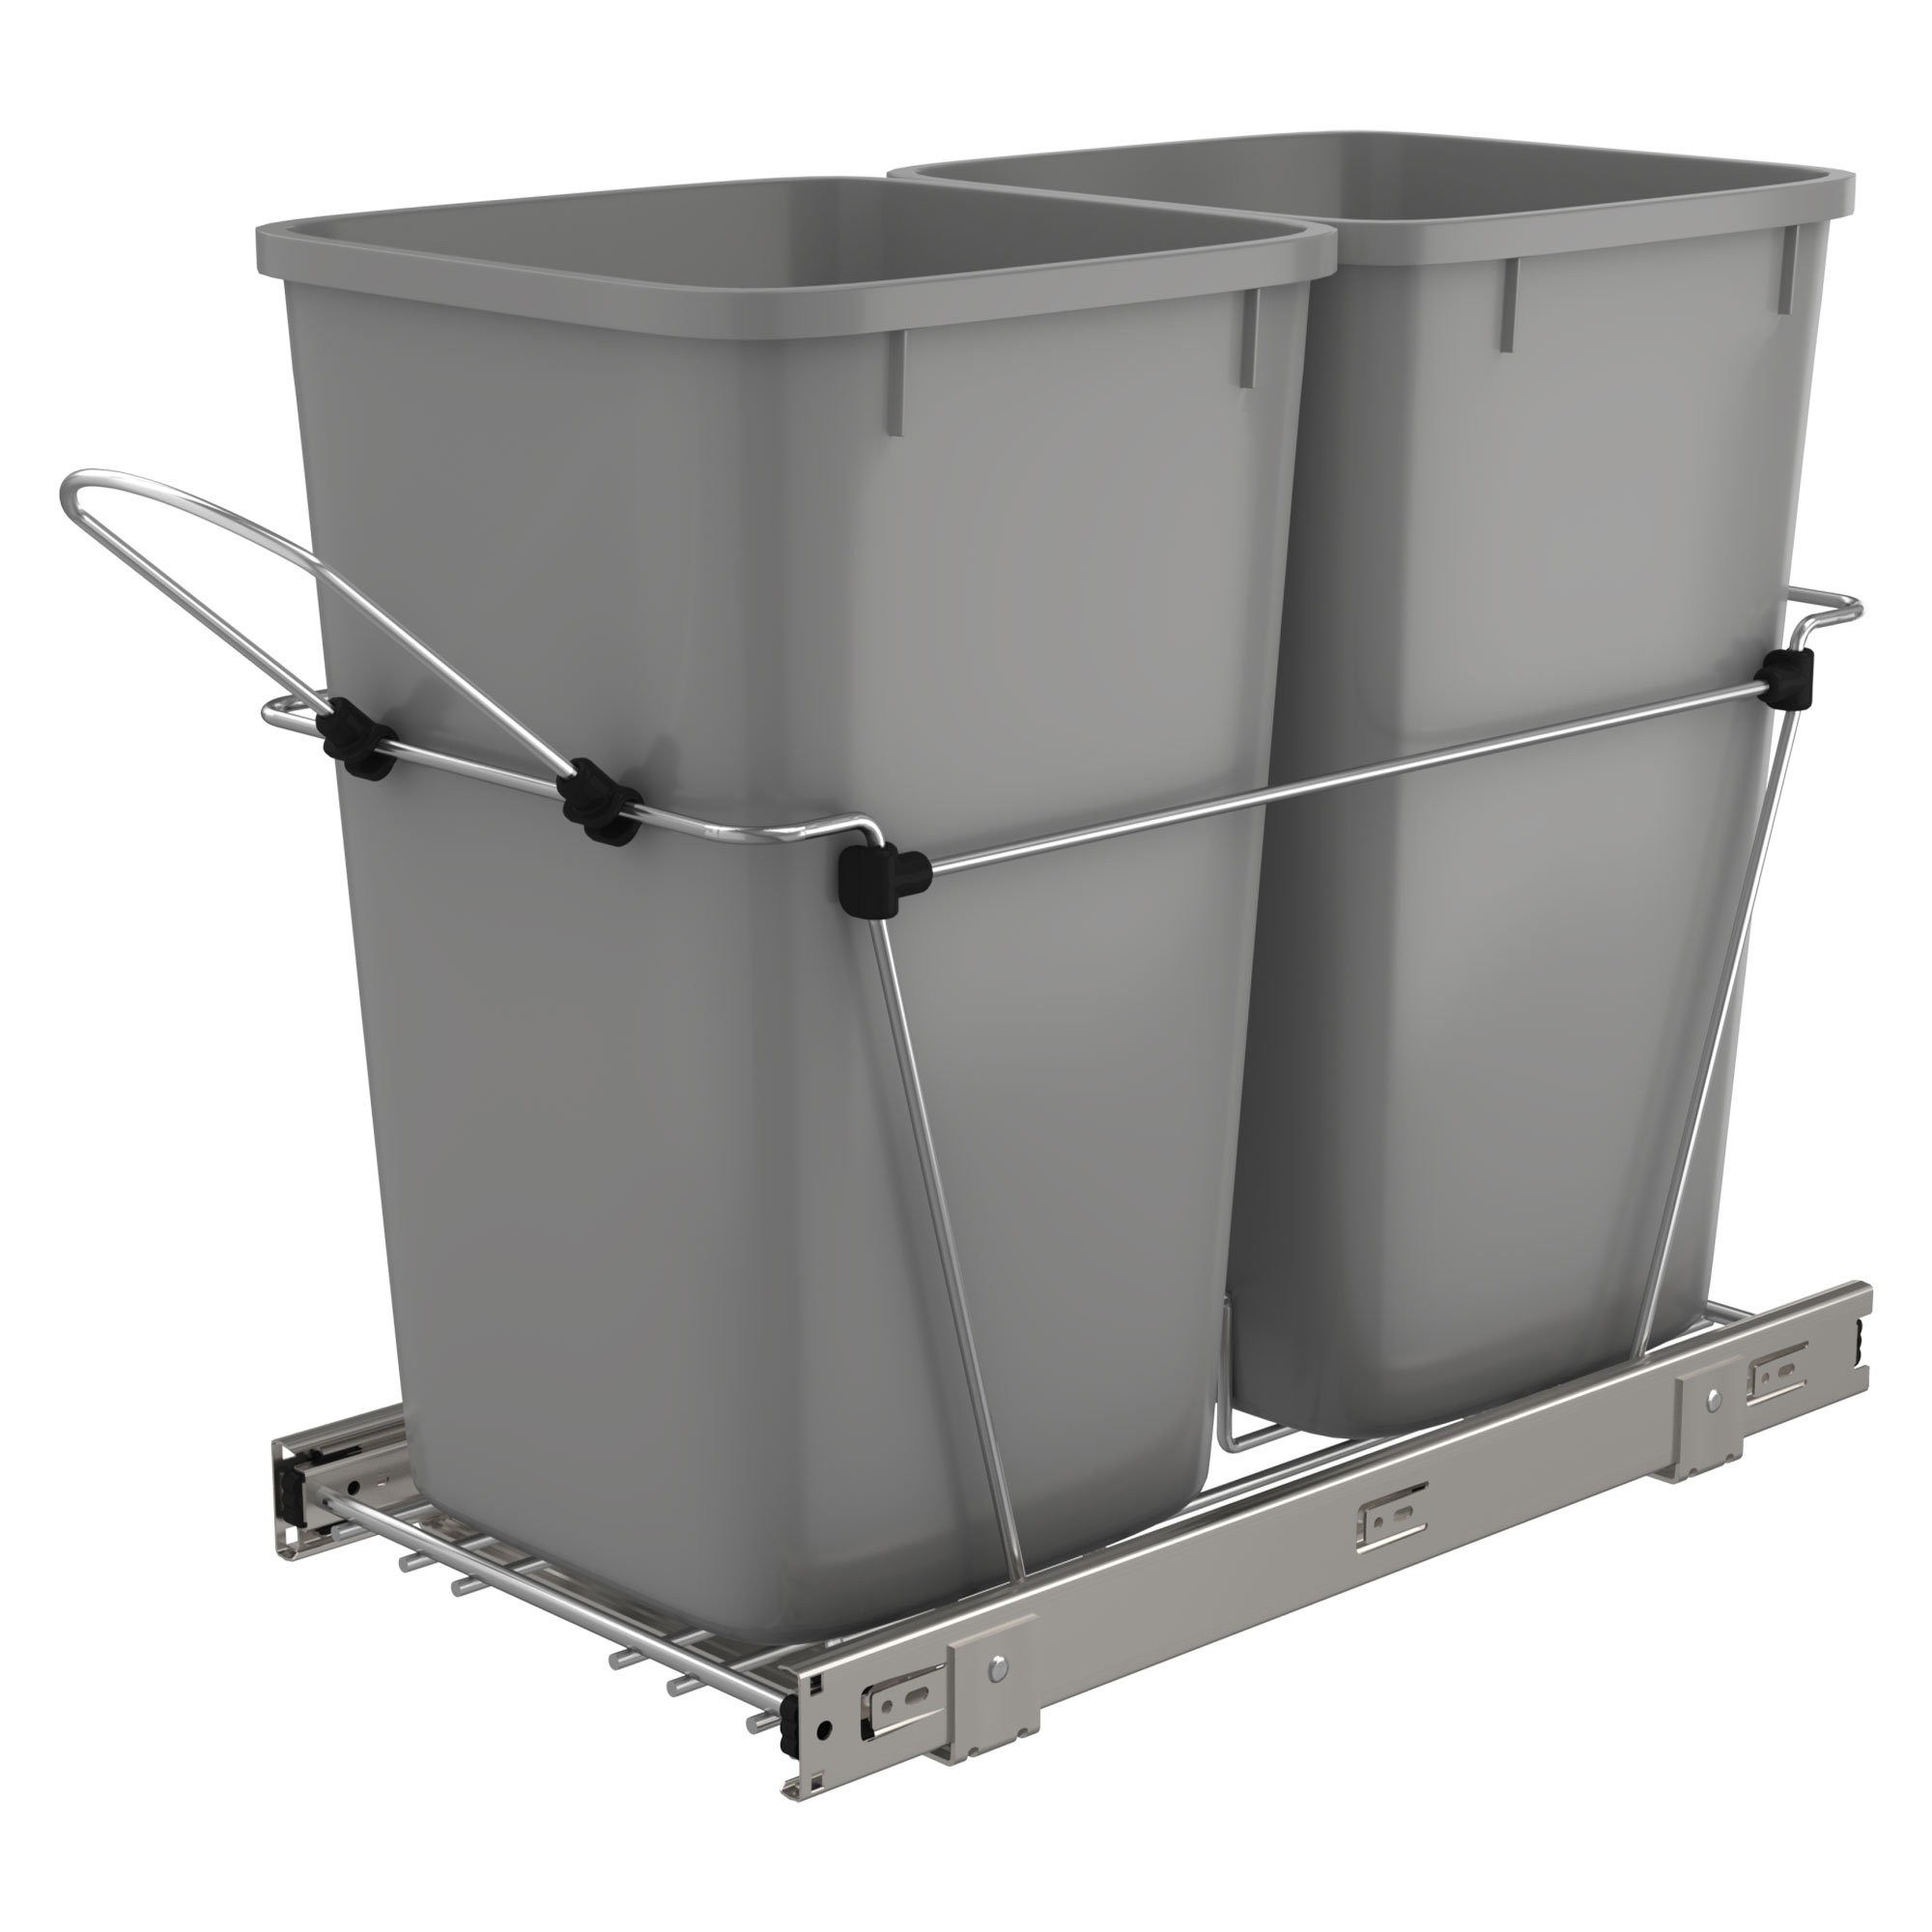 Bottom Mount Under Sink Double Trash Bin Pull-Out, with 15 Liter (4 Gallon)  and 8 Liter (2 Gallon) Gray Bins with Lids, with Soft-Close Slides by  Rev-A-Shelf